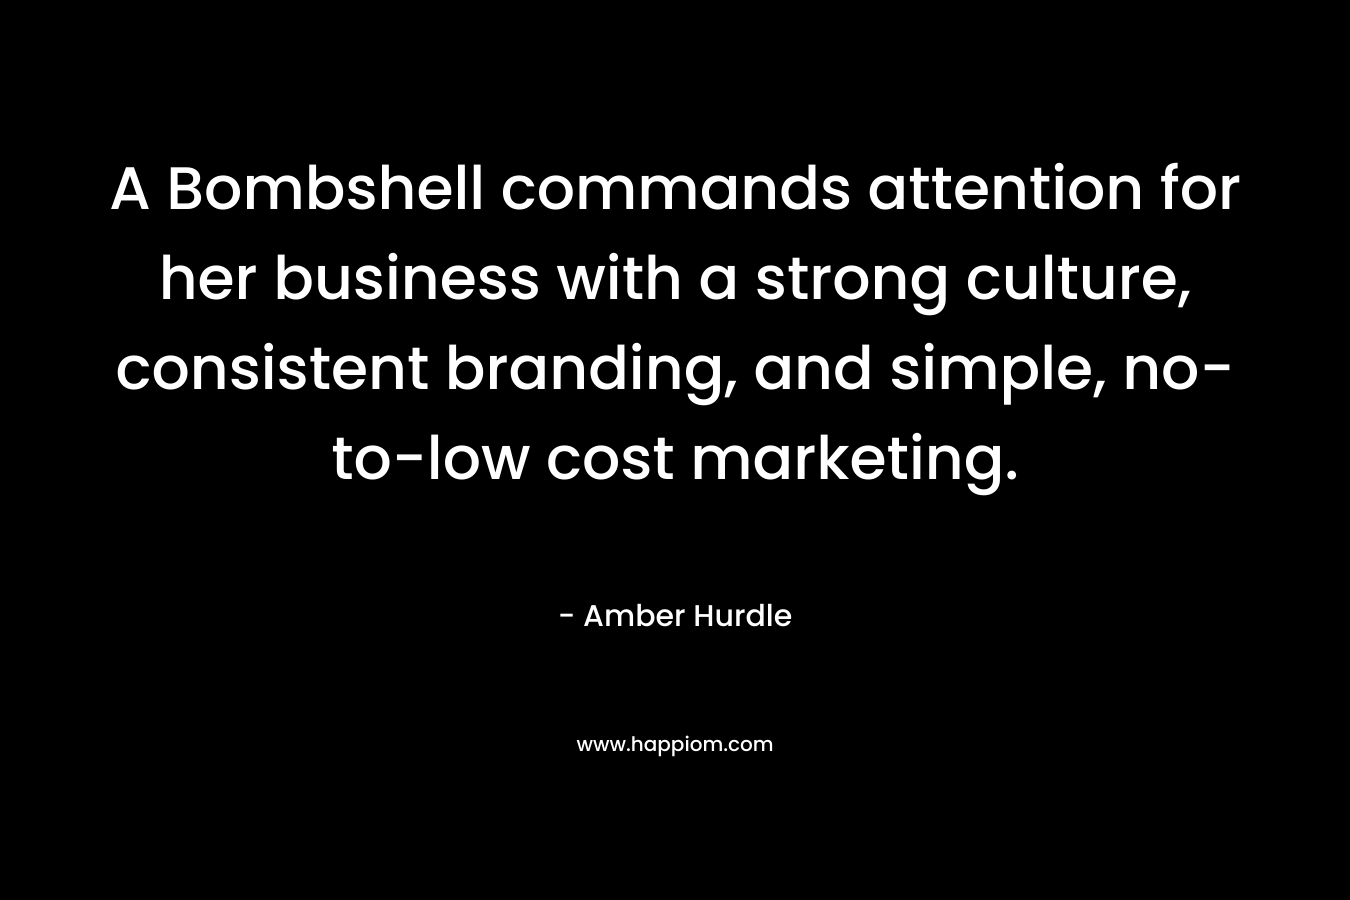 A Bombshell commands attention for her business with a strong culture, consistent branding, and simple, no-to-low cost marketing.